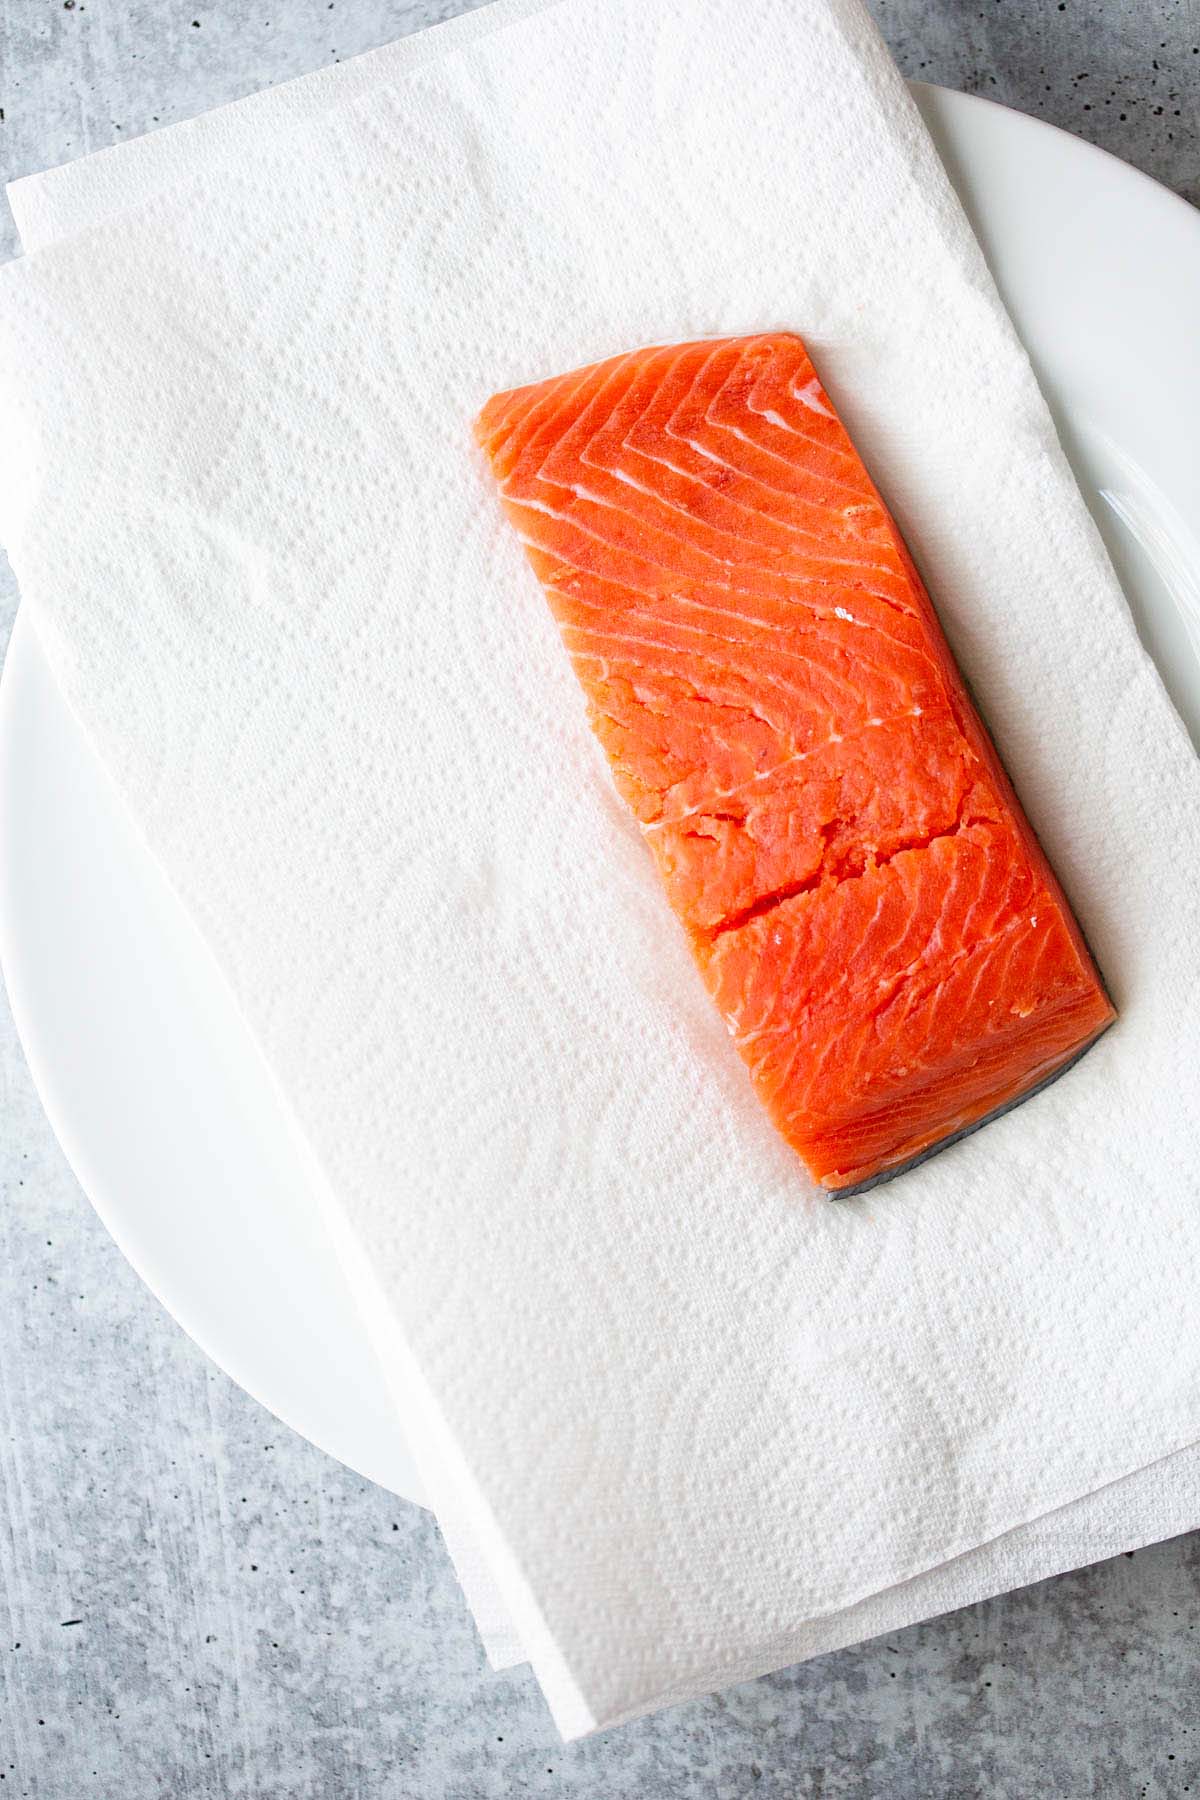 Raw salmon on a white plate.